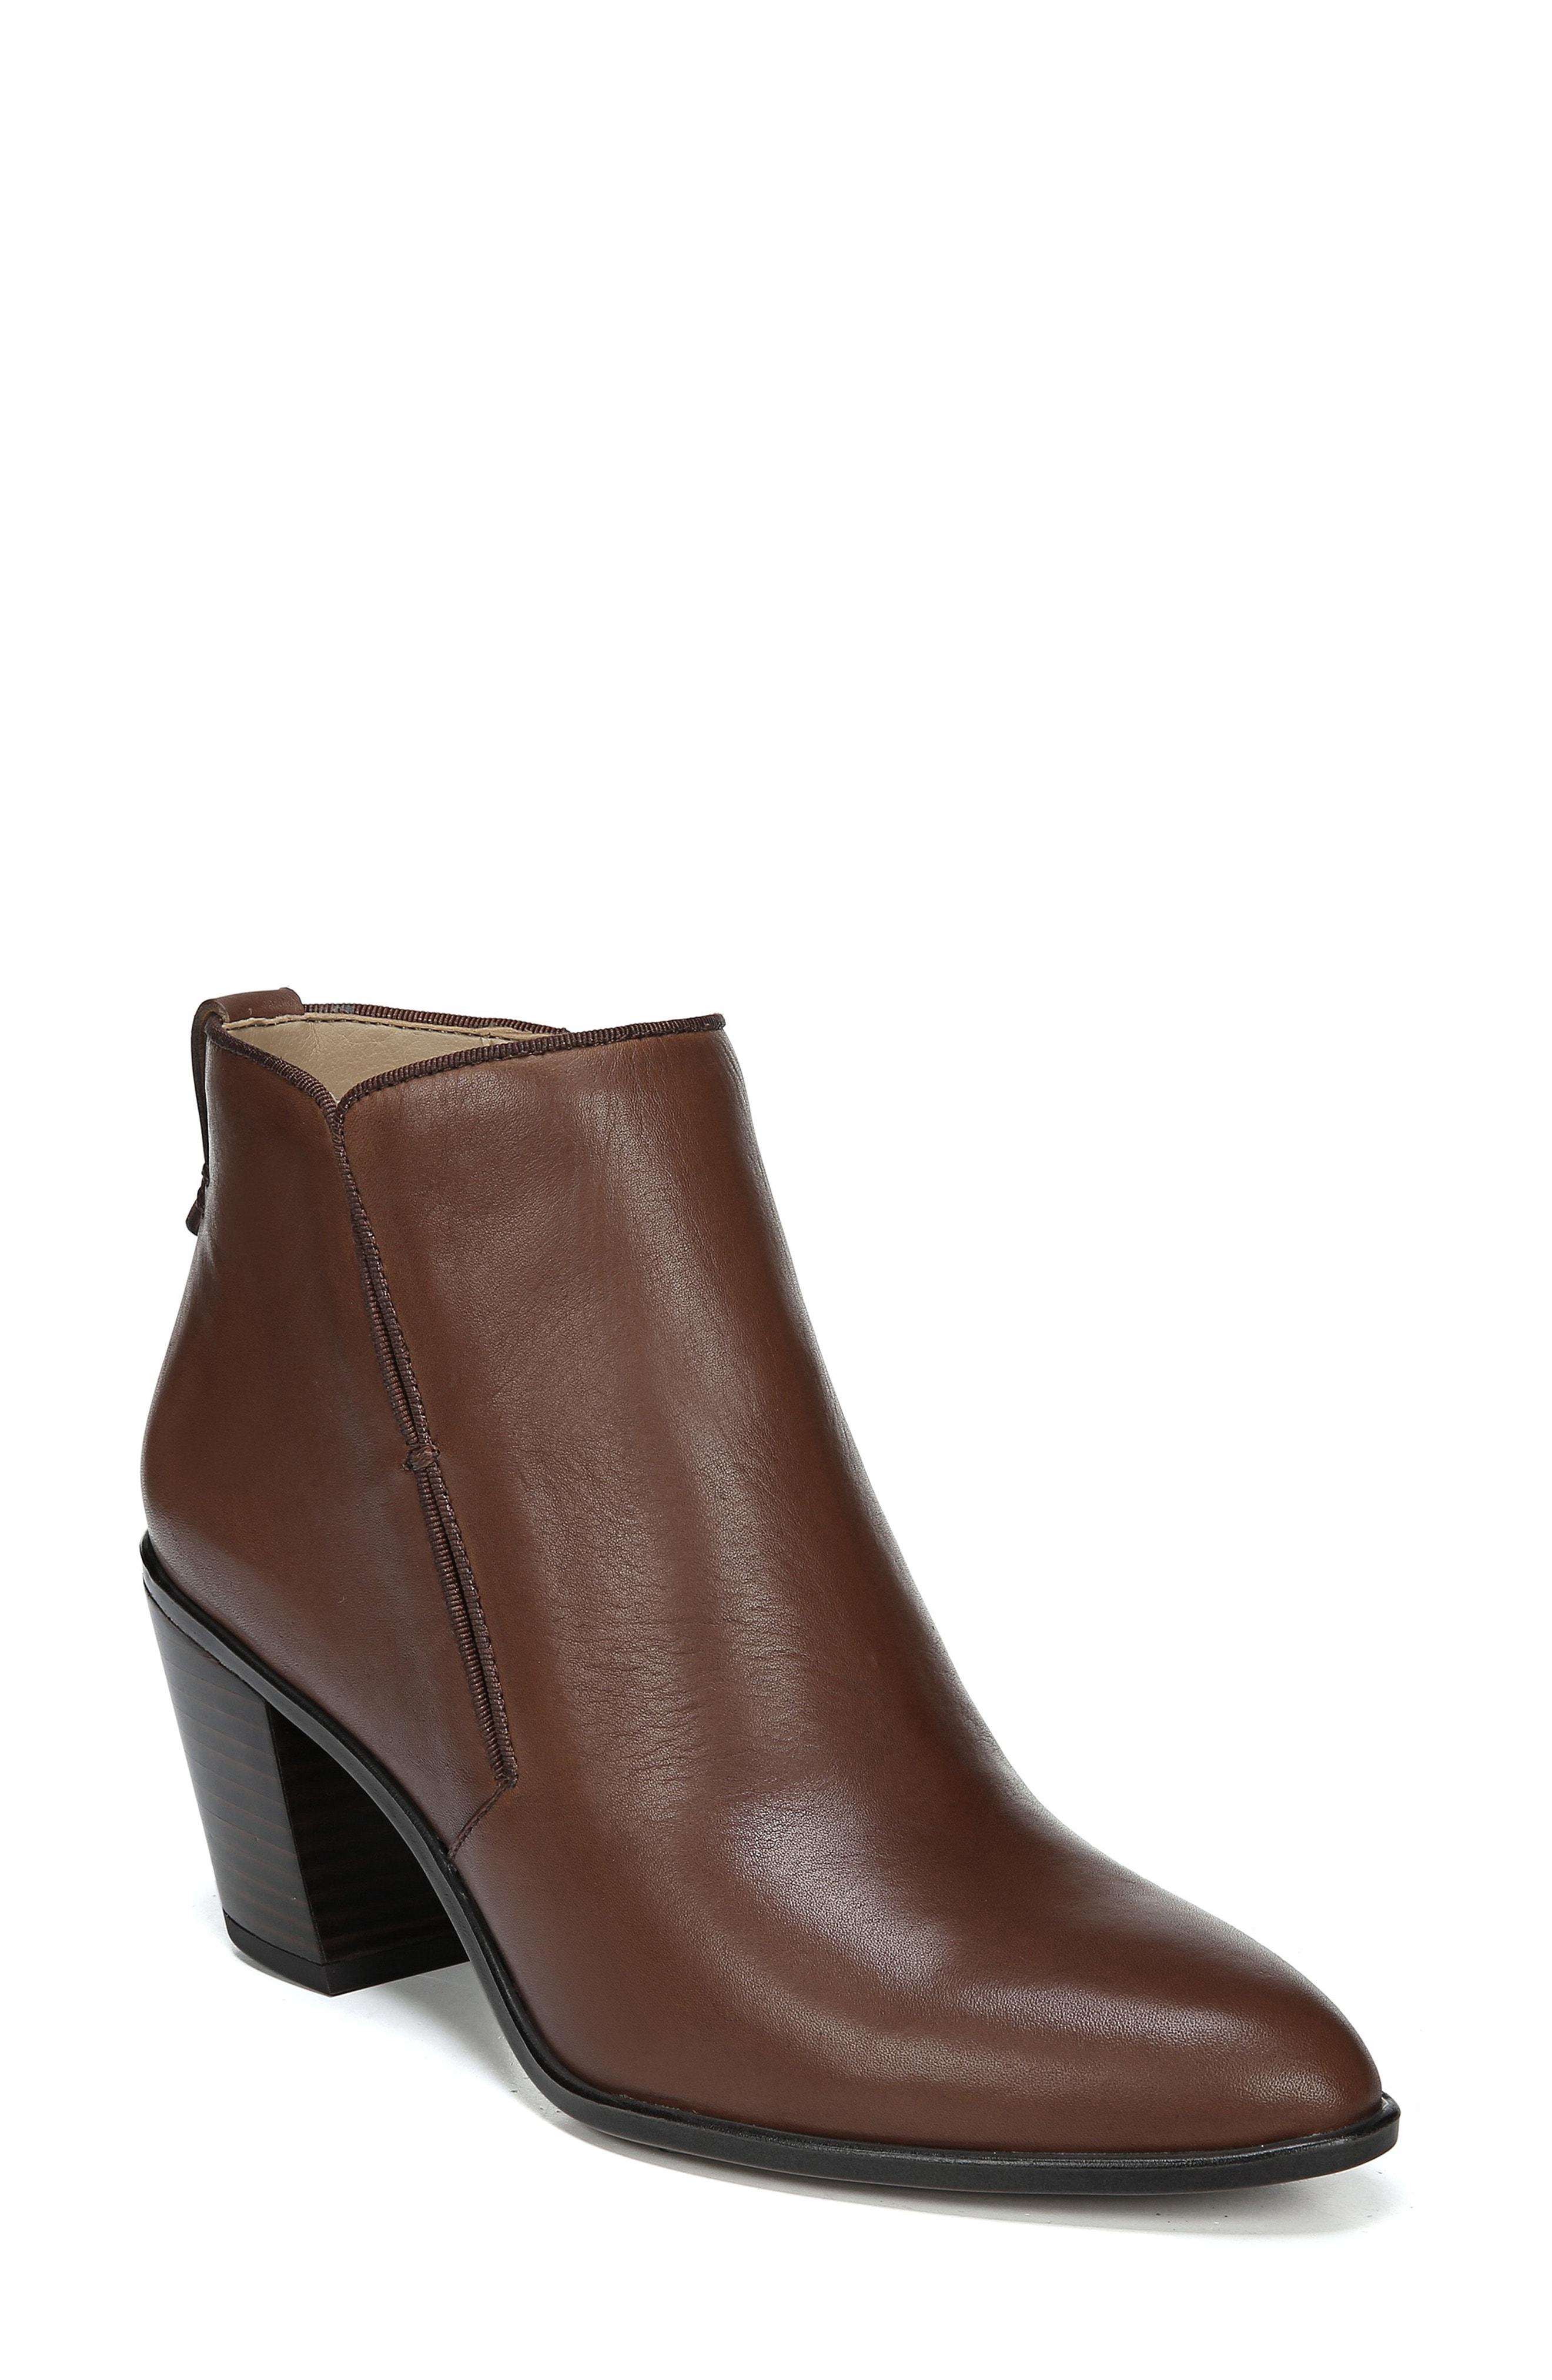 Franco Sarto Orchard Leather Bootie in 